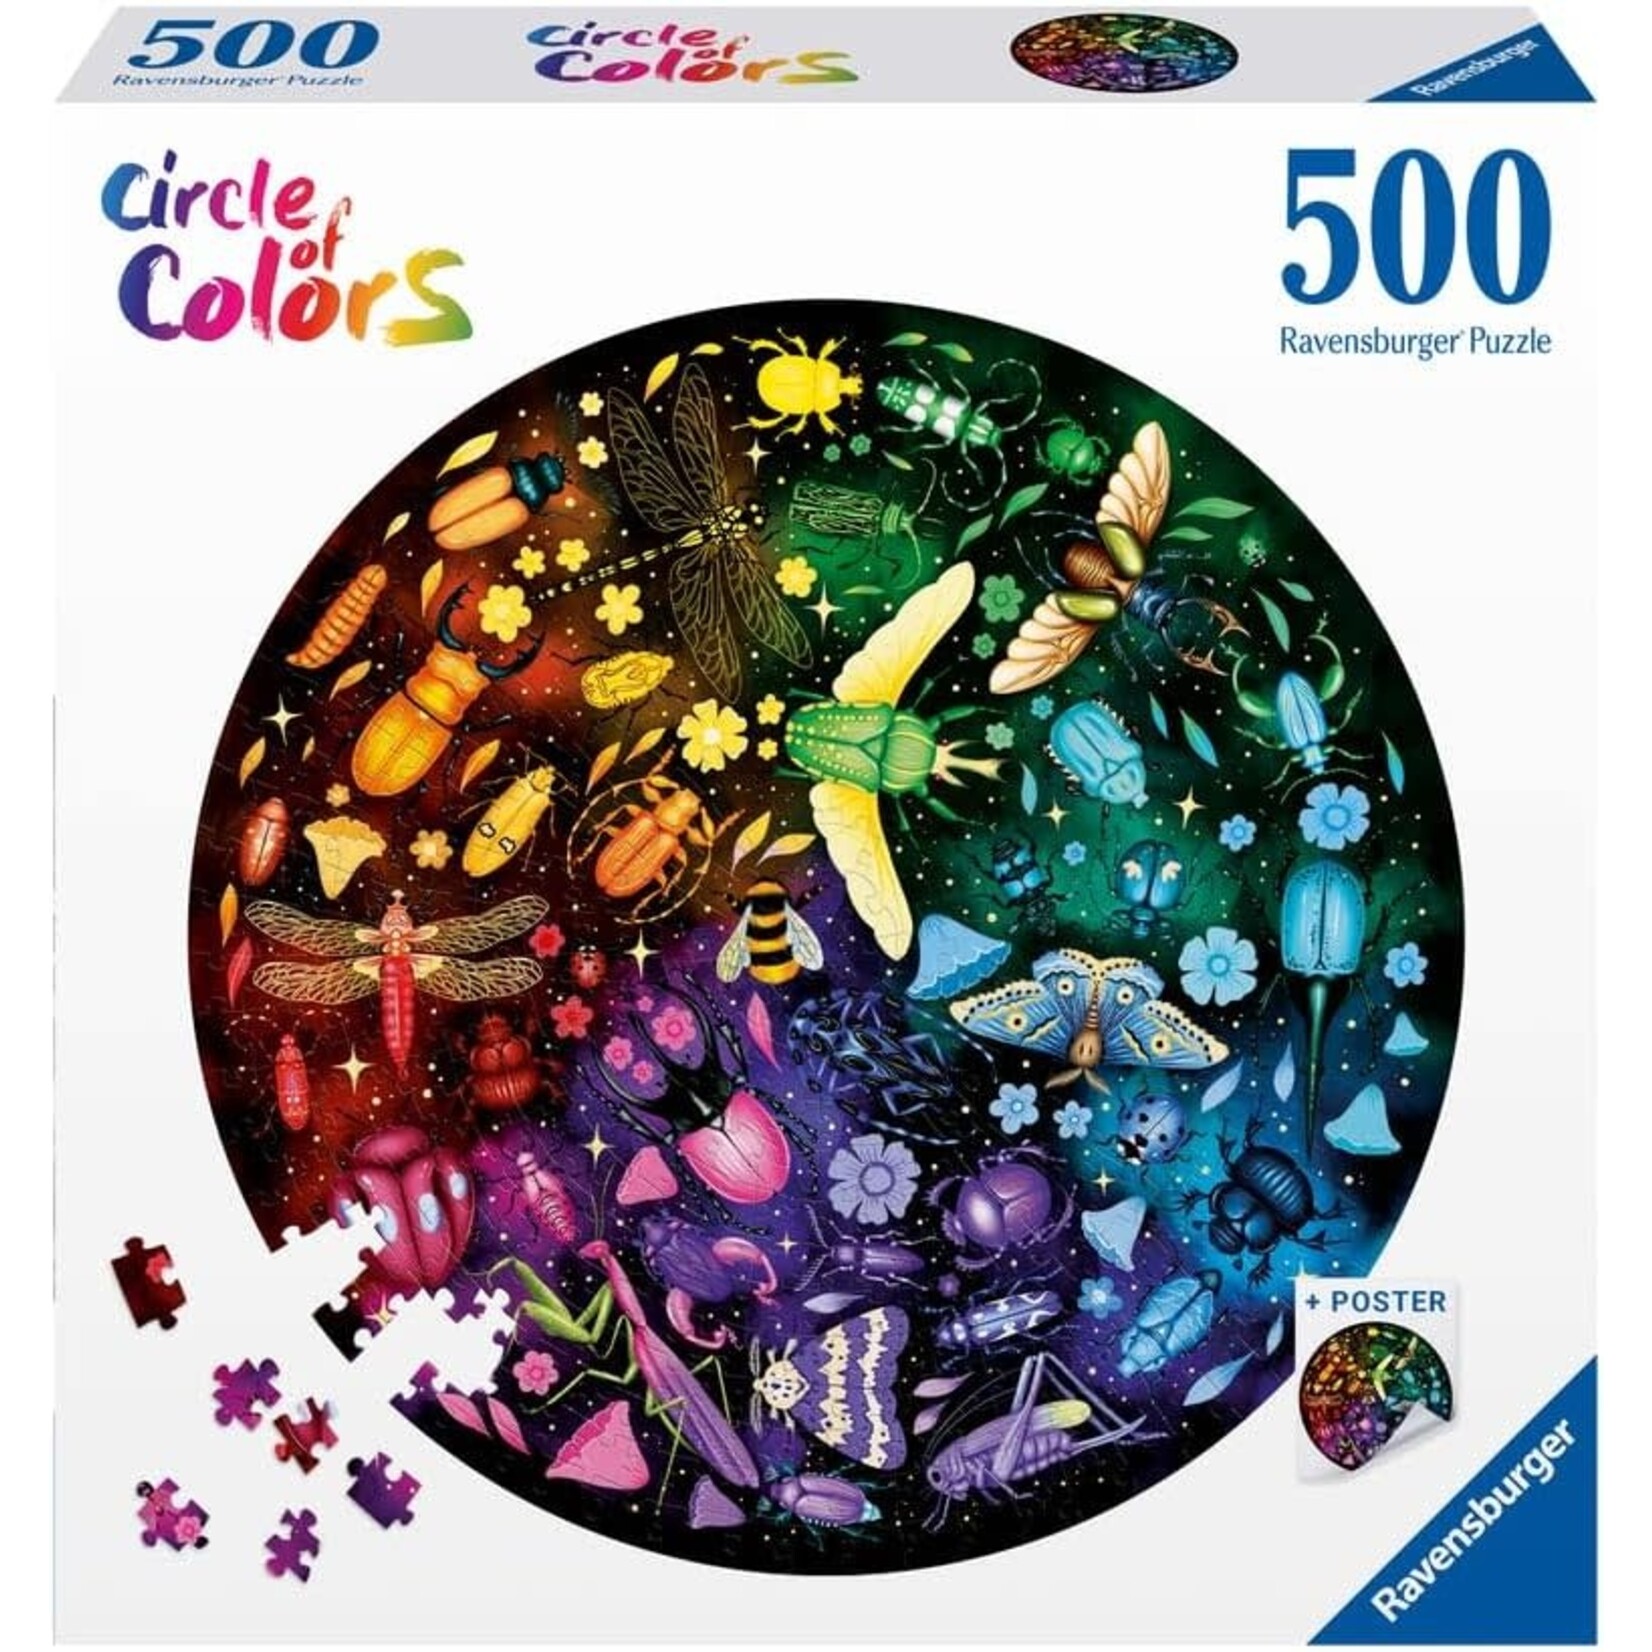 Ravensburger Insects Round Puzzle